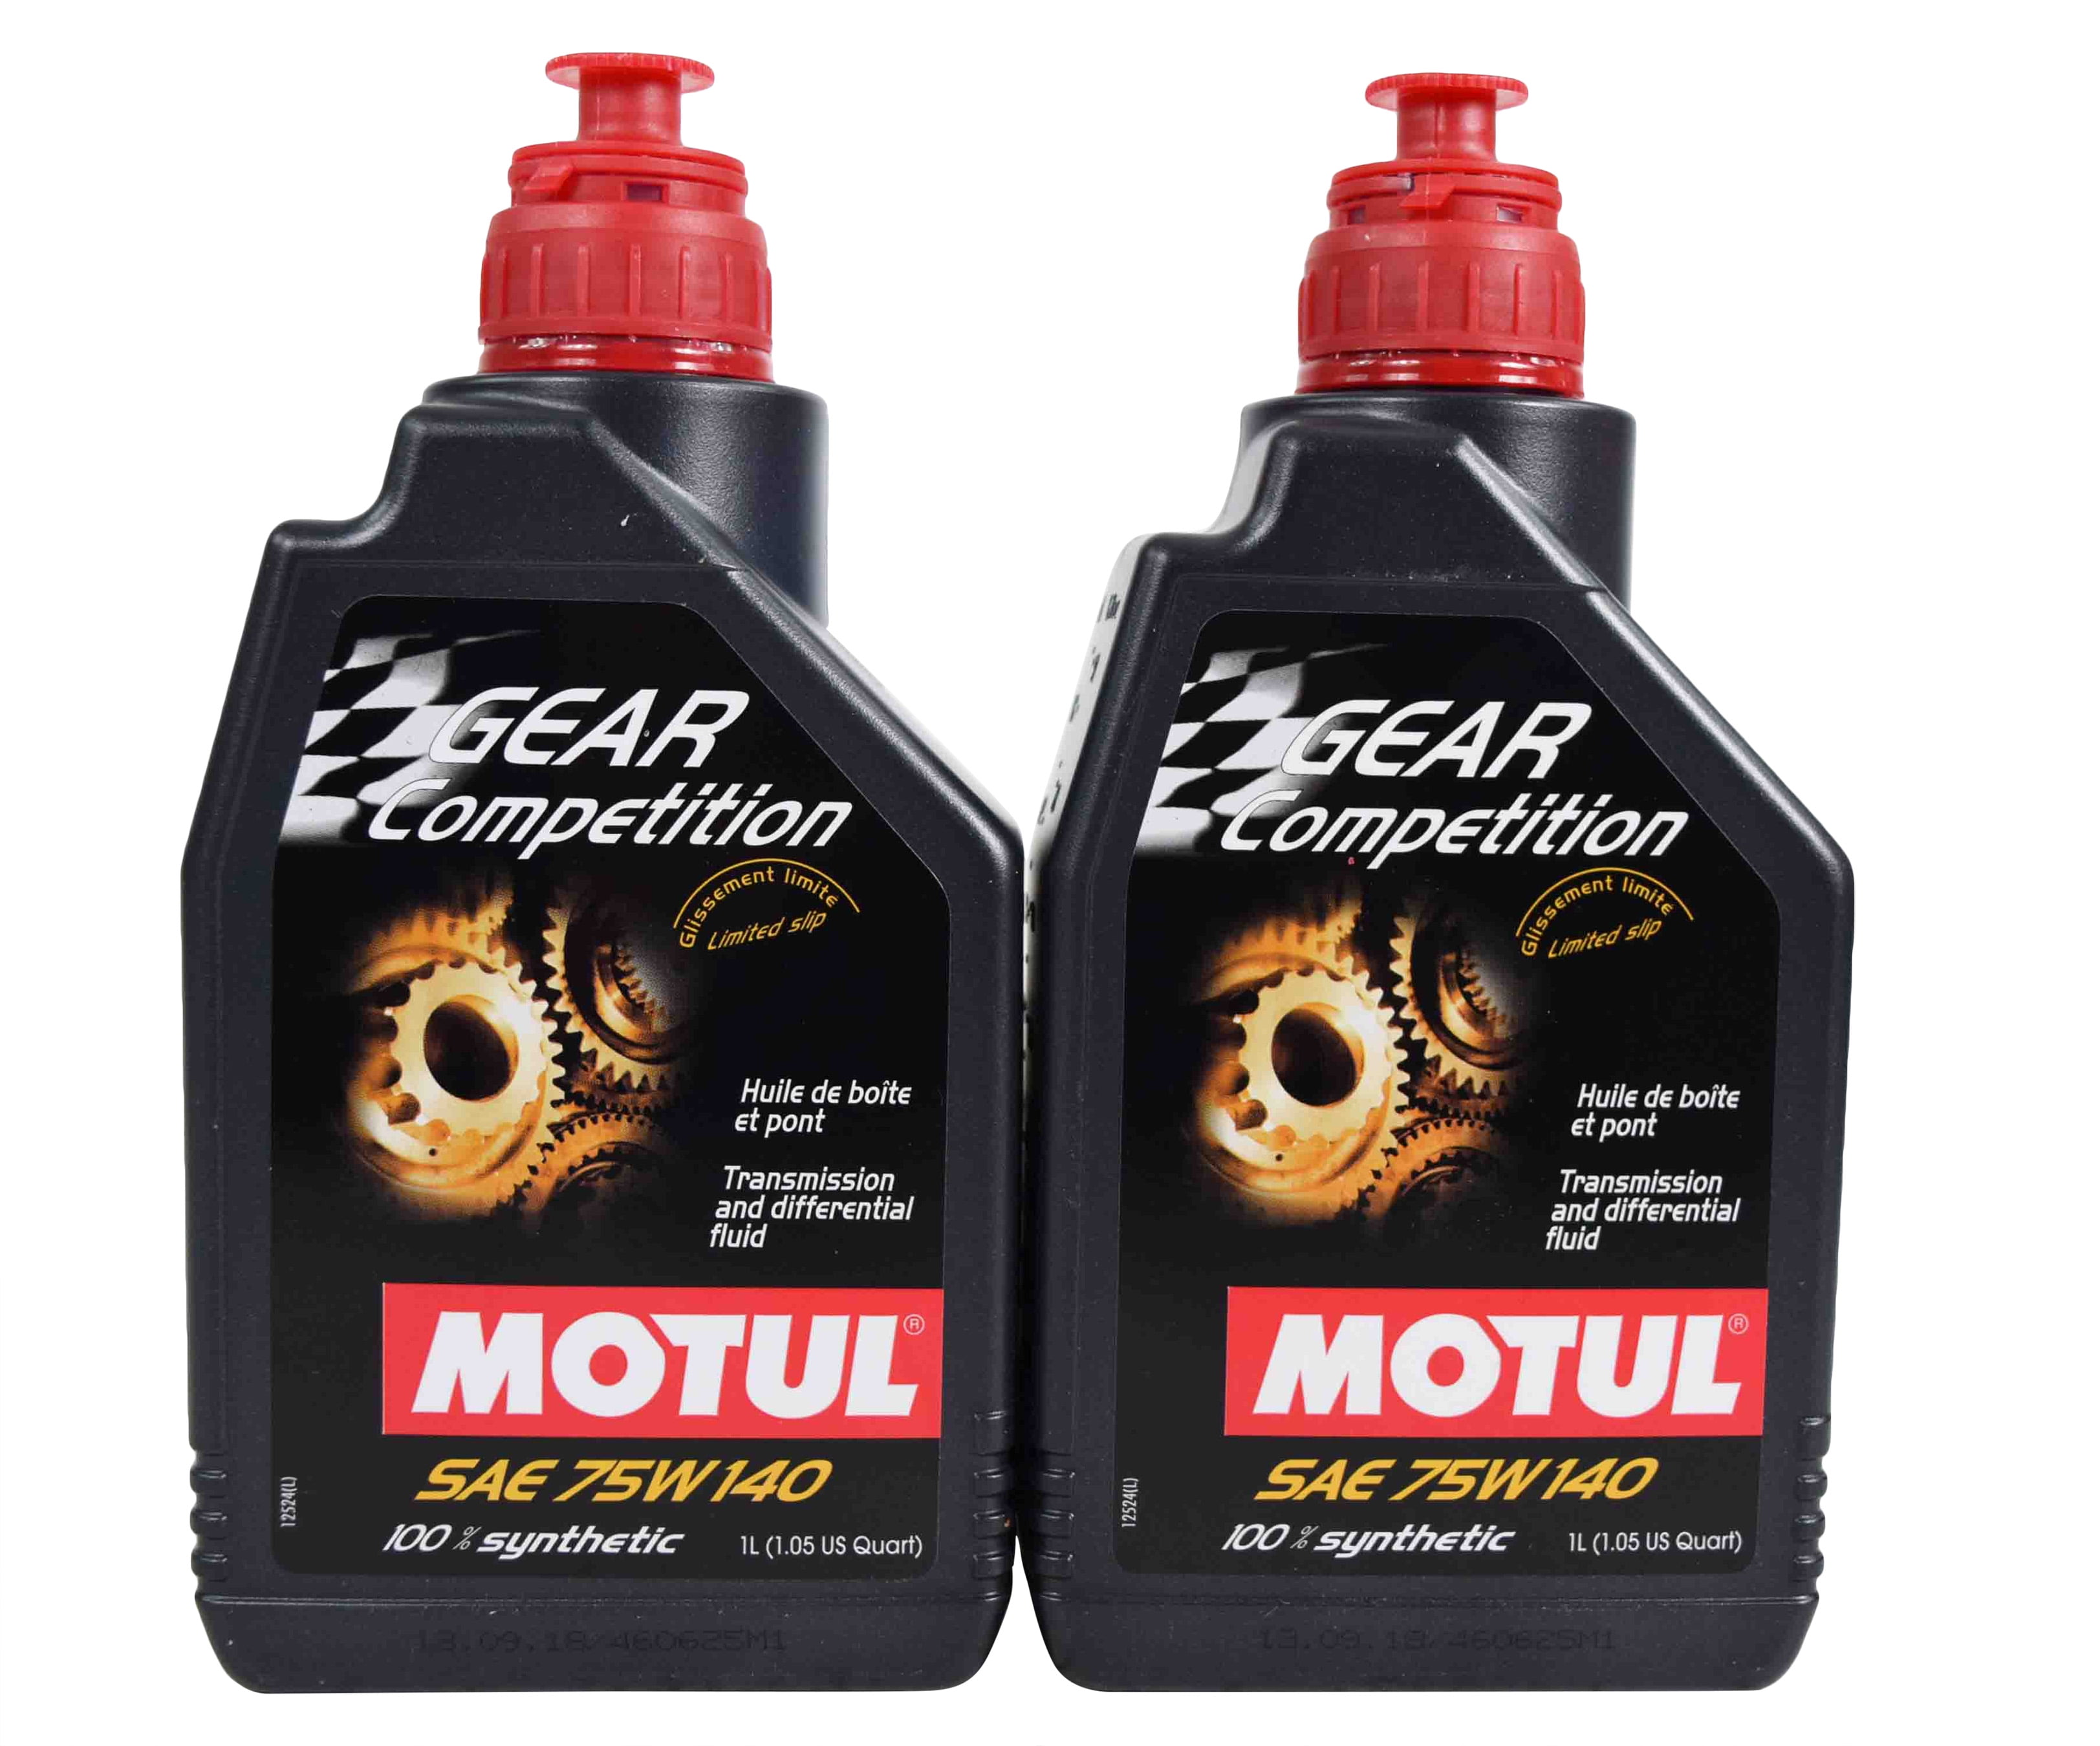 Motul 105779 Full Synthetic Gear Competition SAE 75W140 Oil 75W-140 - 1L 2 Pack - Walmart.com How To Get Gear Oil Out Of Clothes